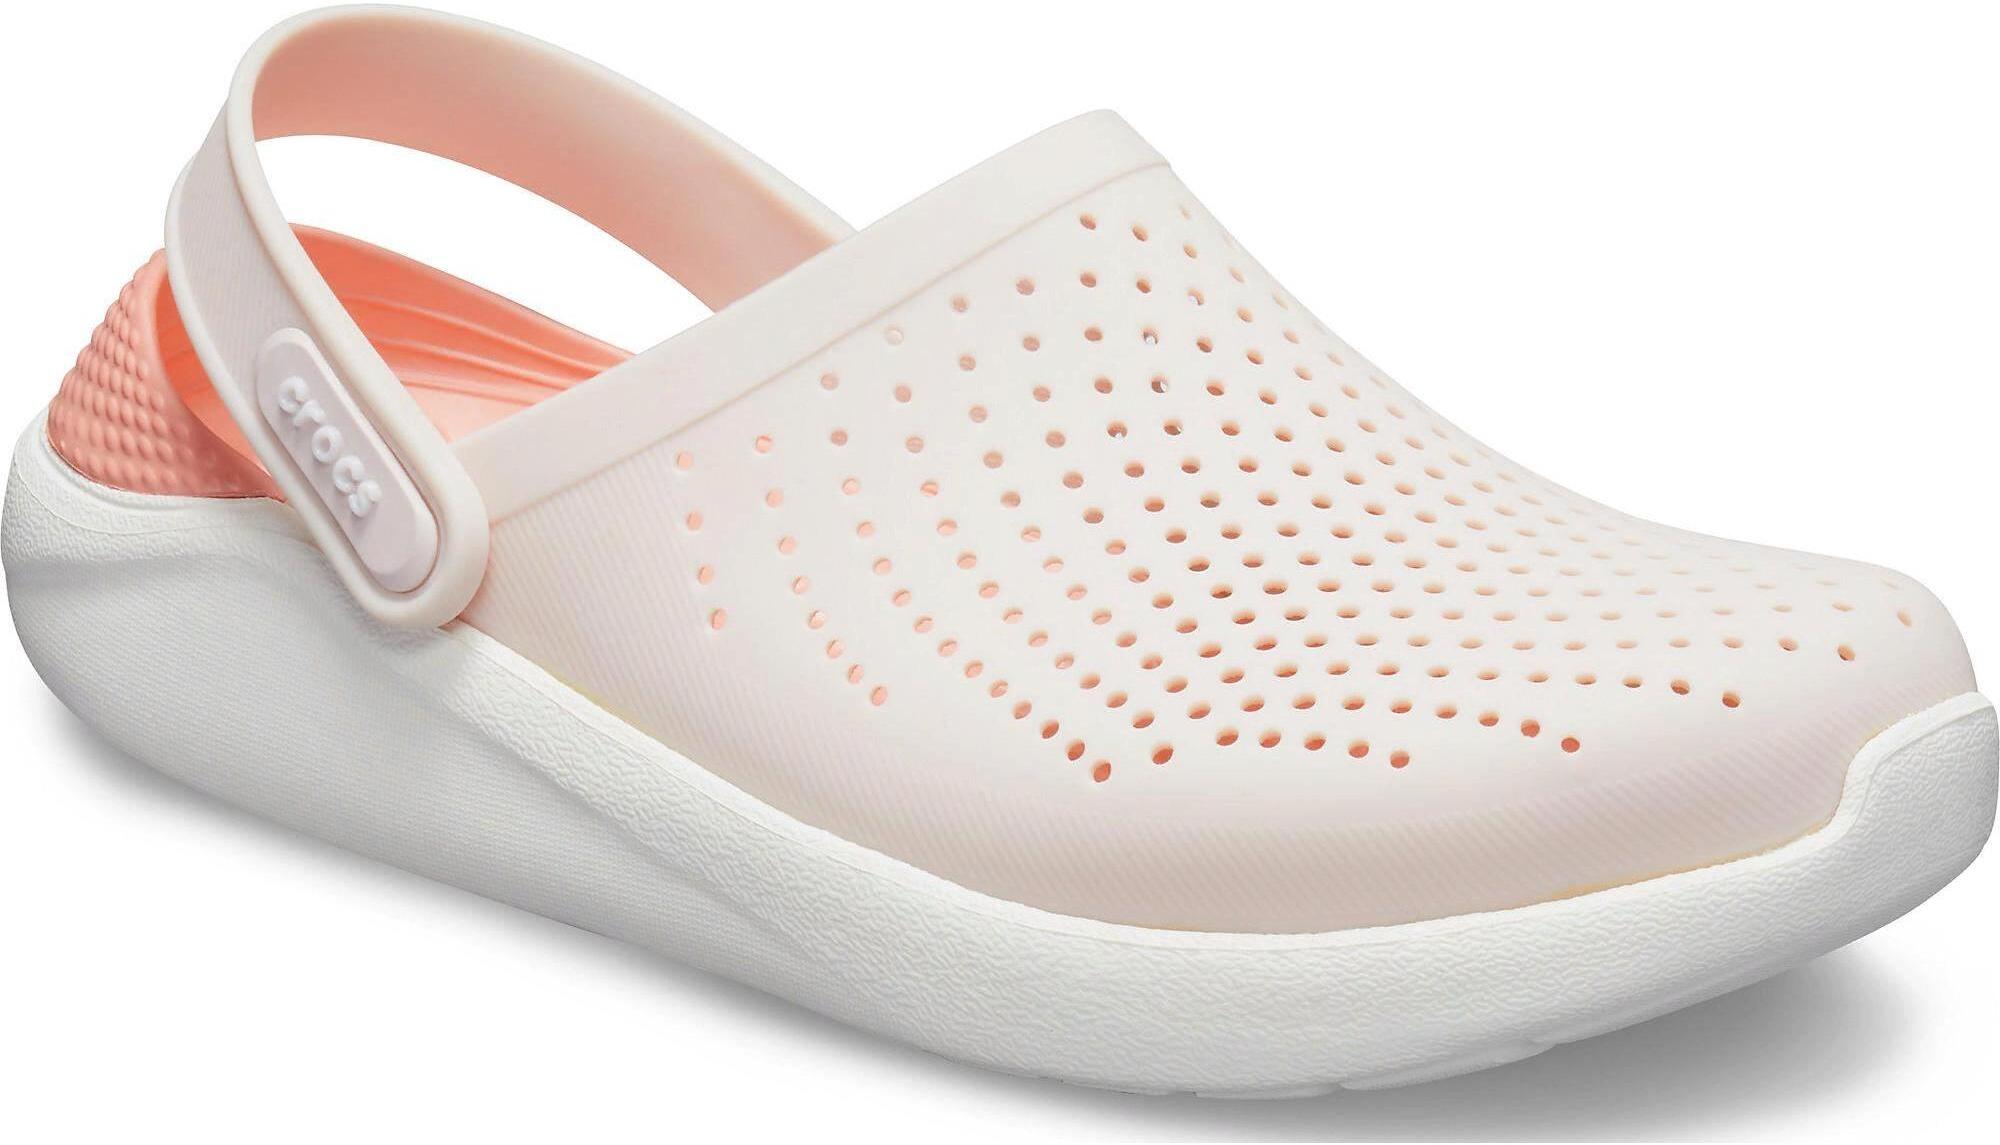 2019 LiteRide Clog Barely Pink/White 